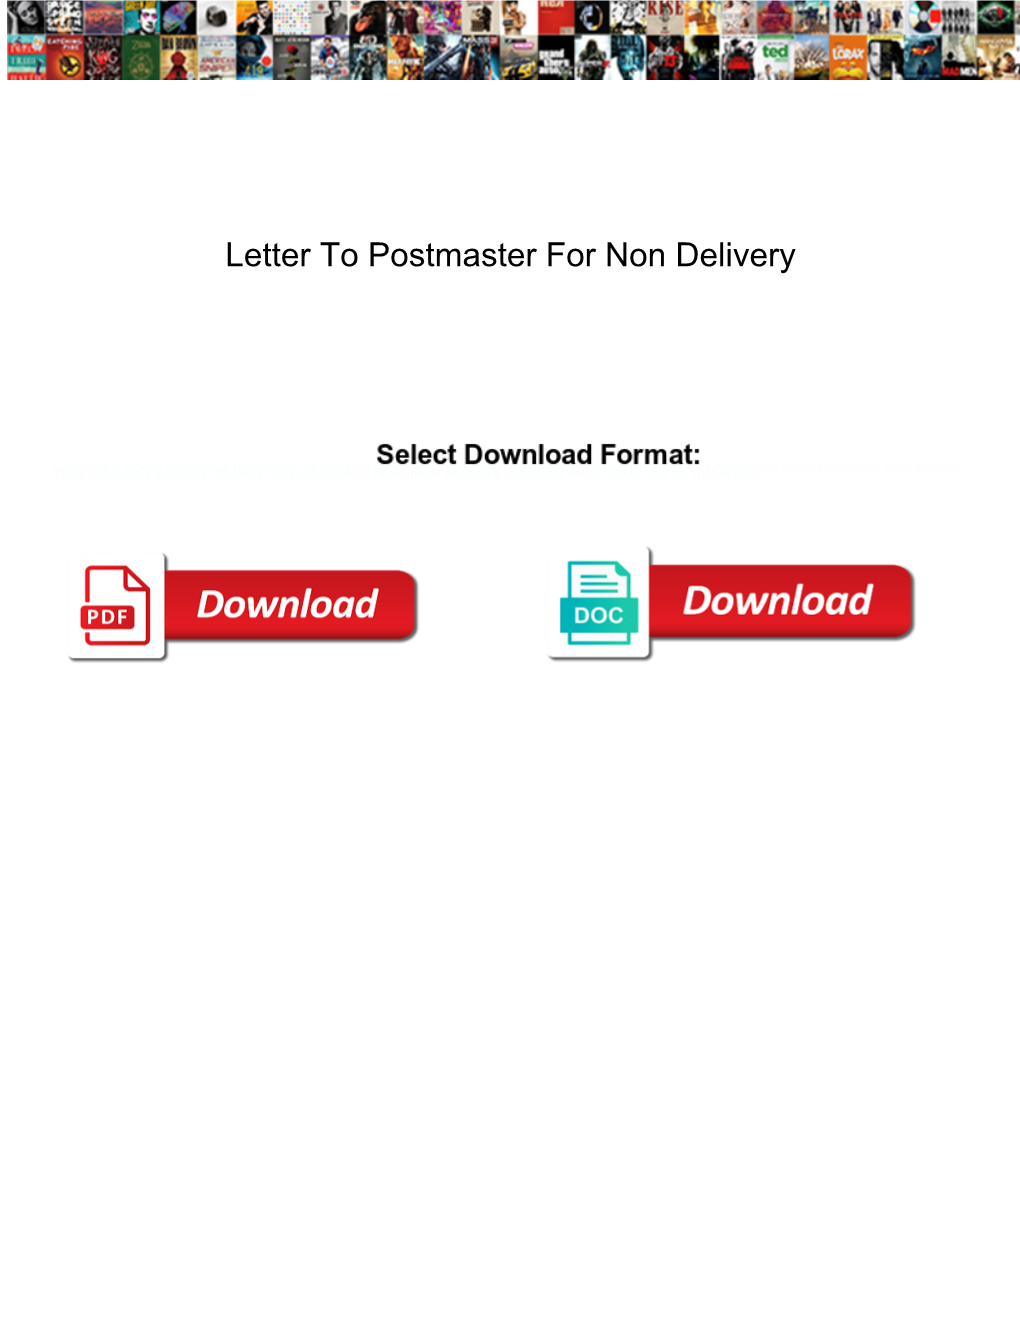 Letter to Postmaster for Non Delivery